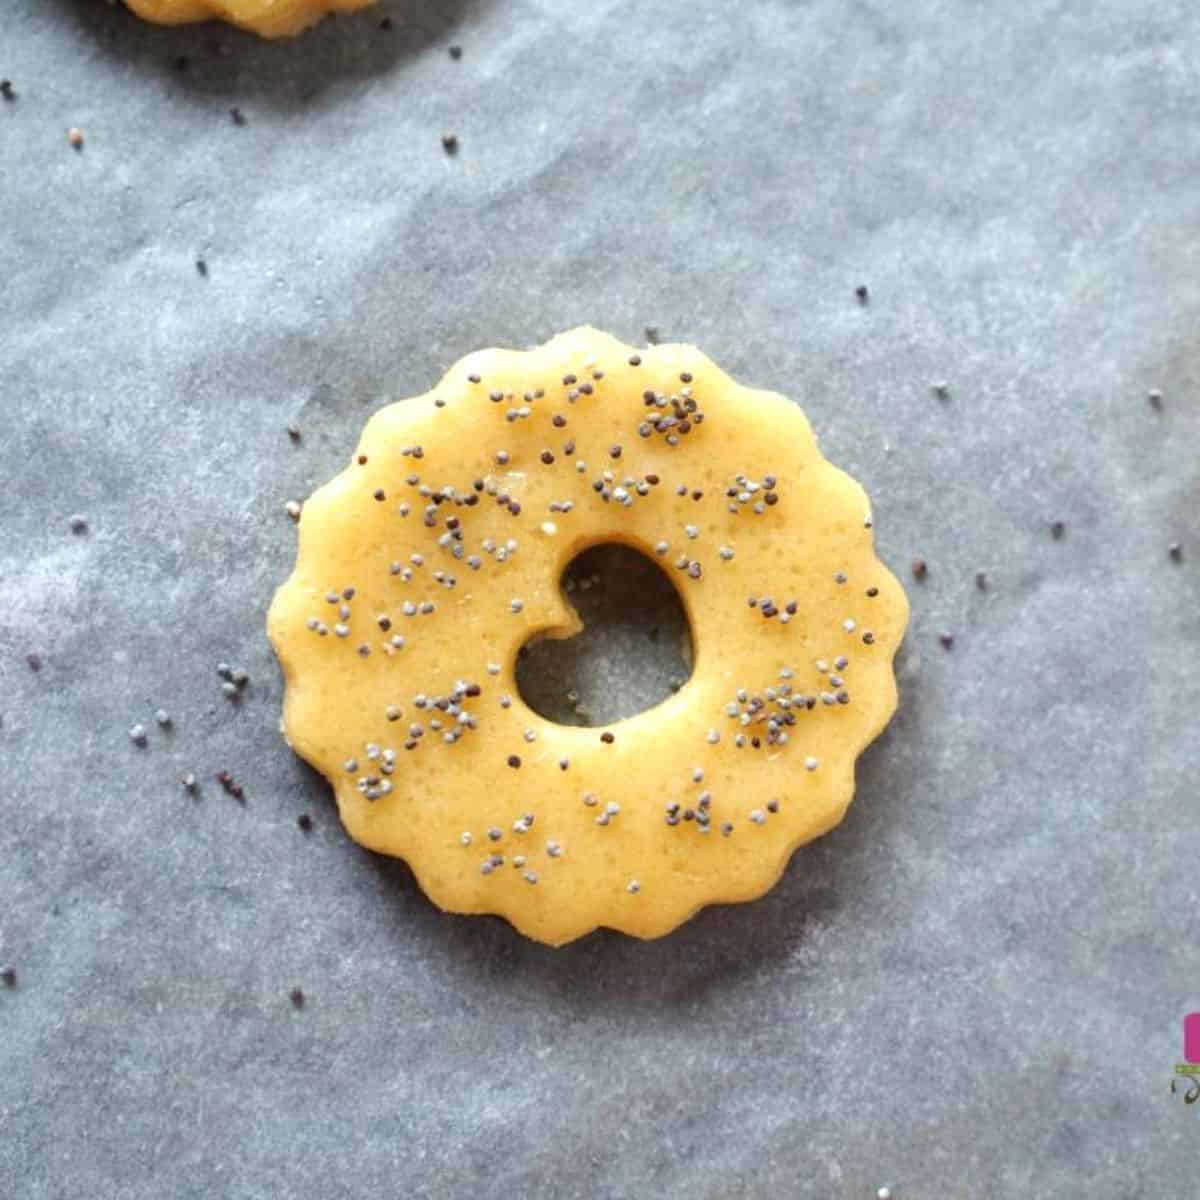 A round scalloped cookies with a heart shaped hole in the center and poppy seed garnish.